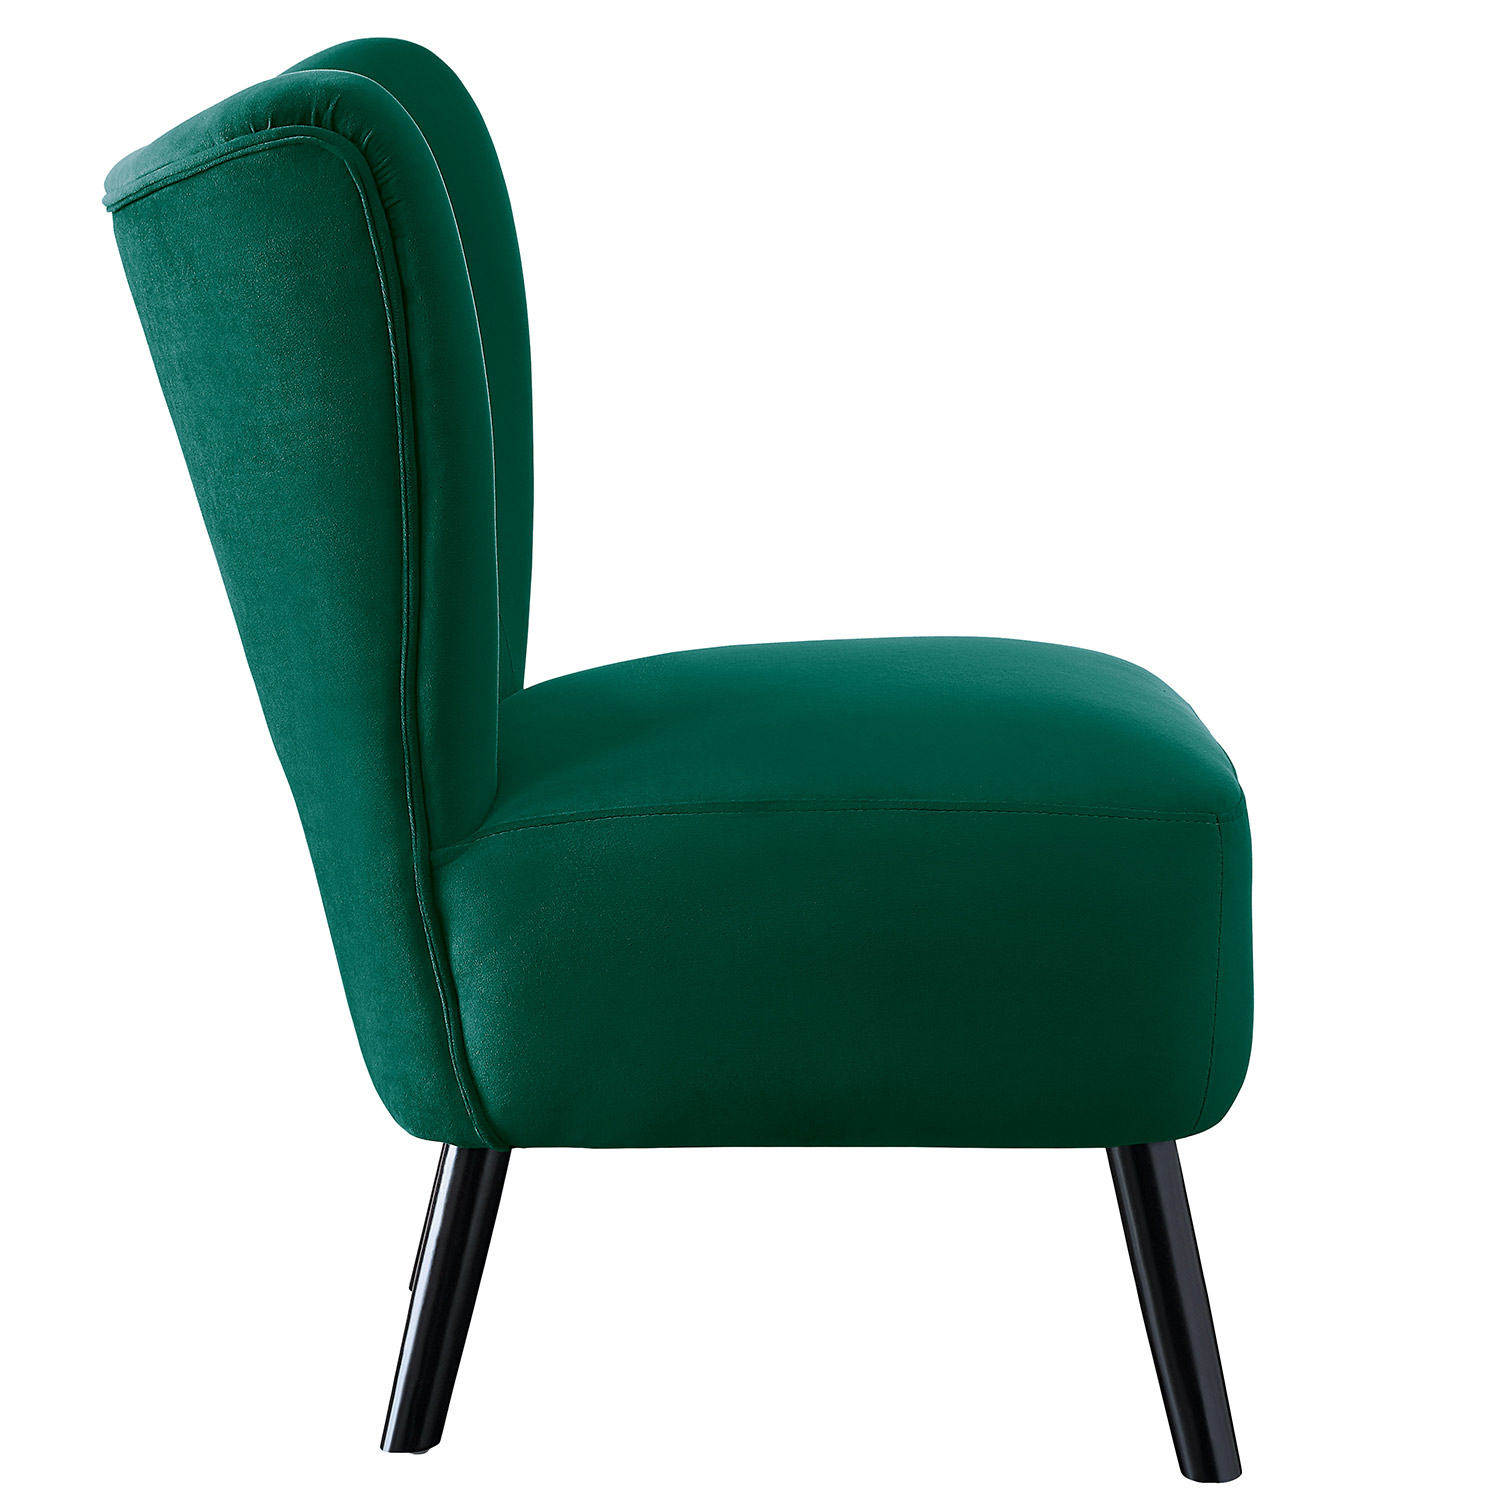 Homelegance Imani Accent Chair - Green